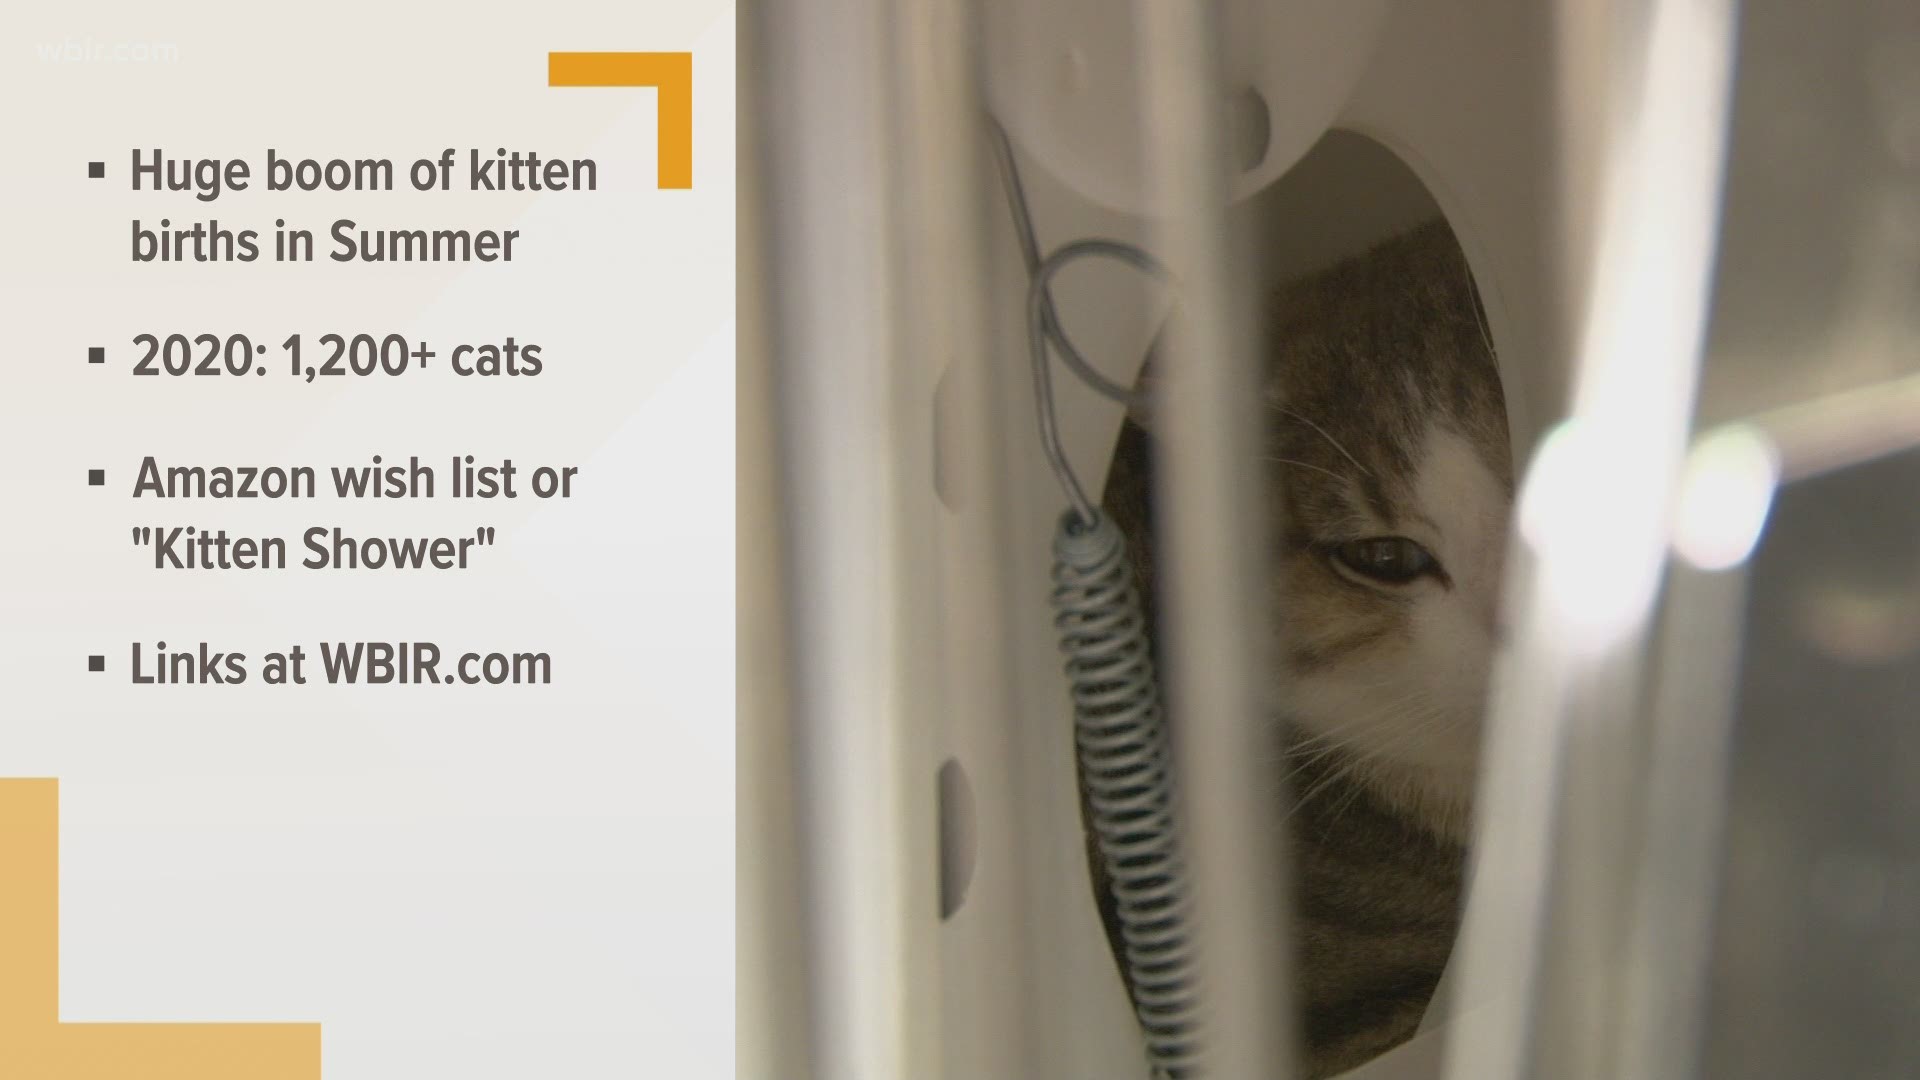 Summer is the time for lots of sun, fun... and kittens! In order to prepare for the yearly kitten boom, YWAC is asking for donations to pay for food and supplies.